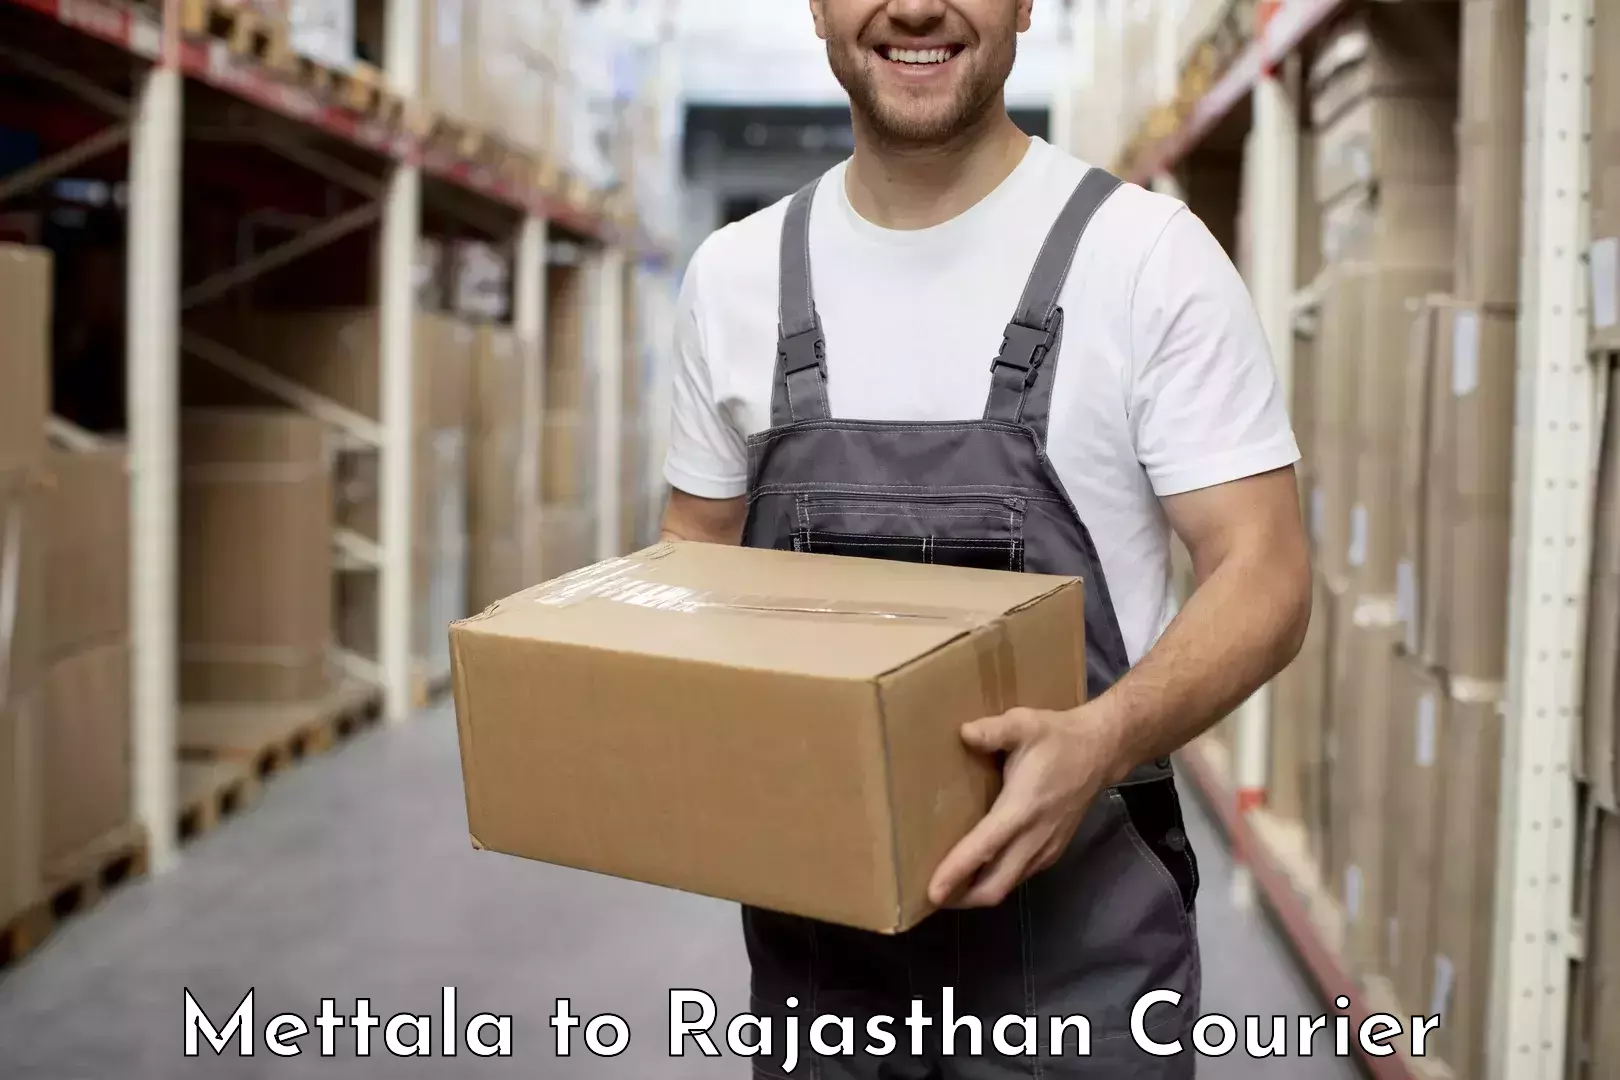 Customer-focused courier Mettala to Bhiwadi